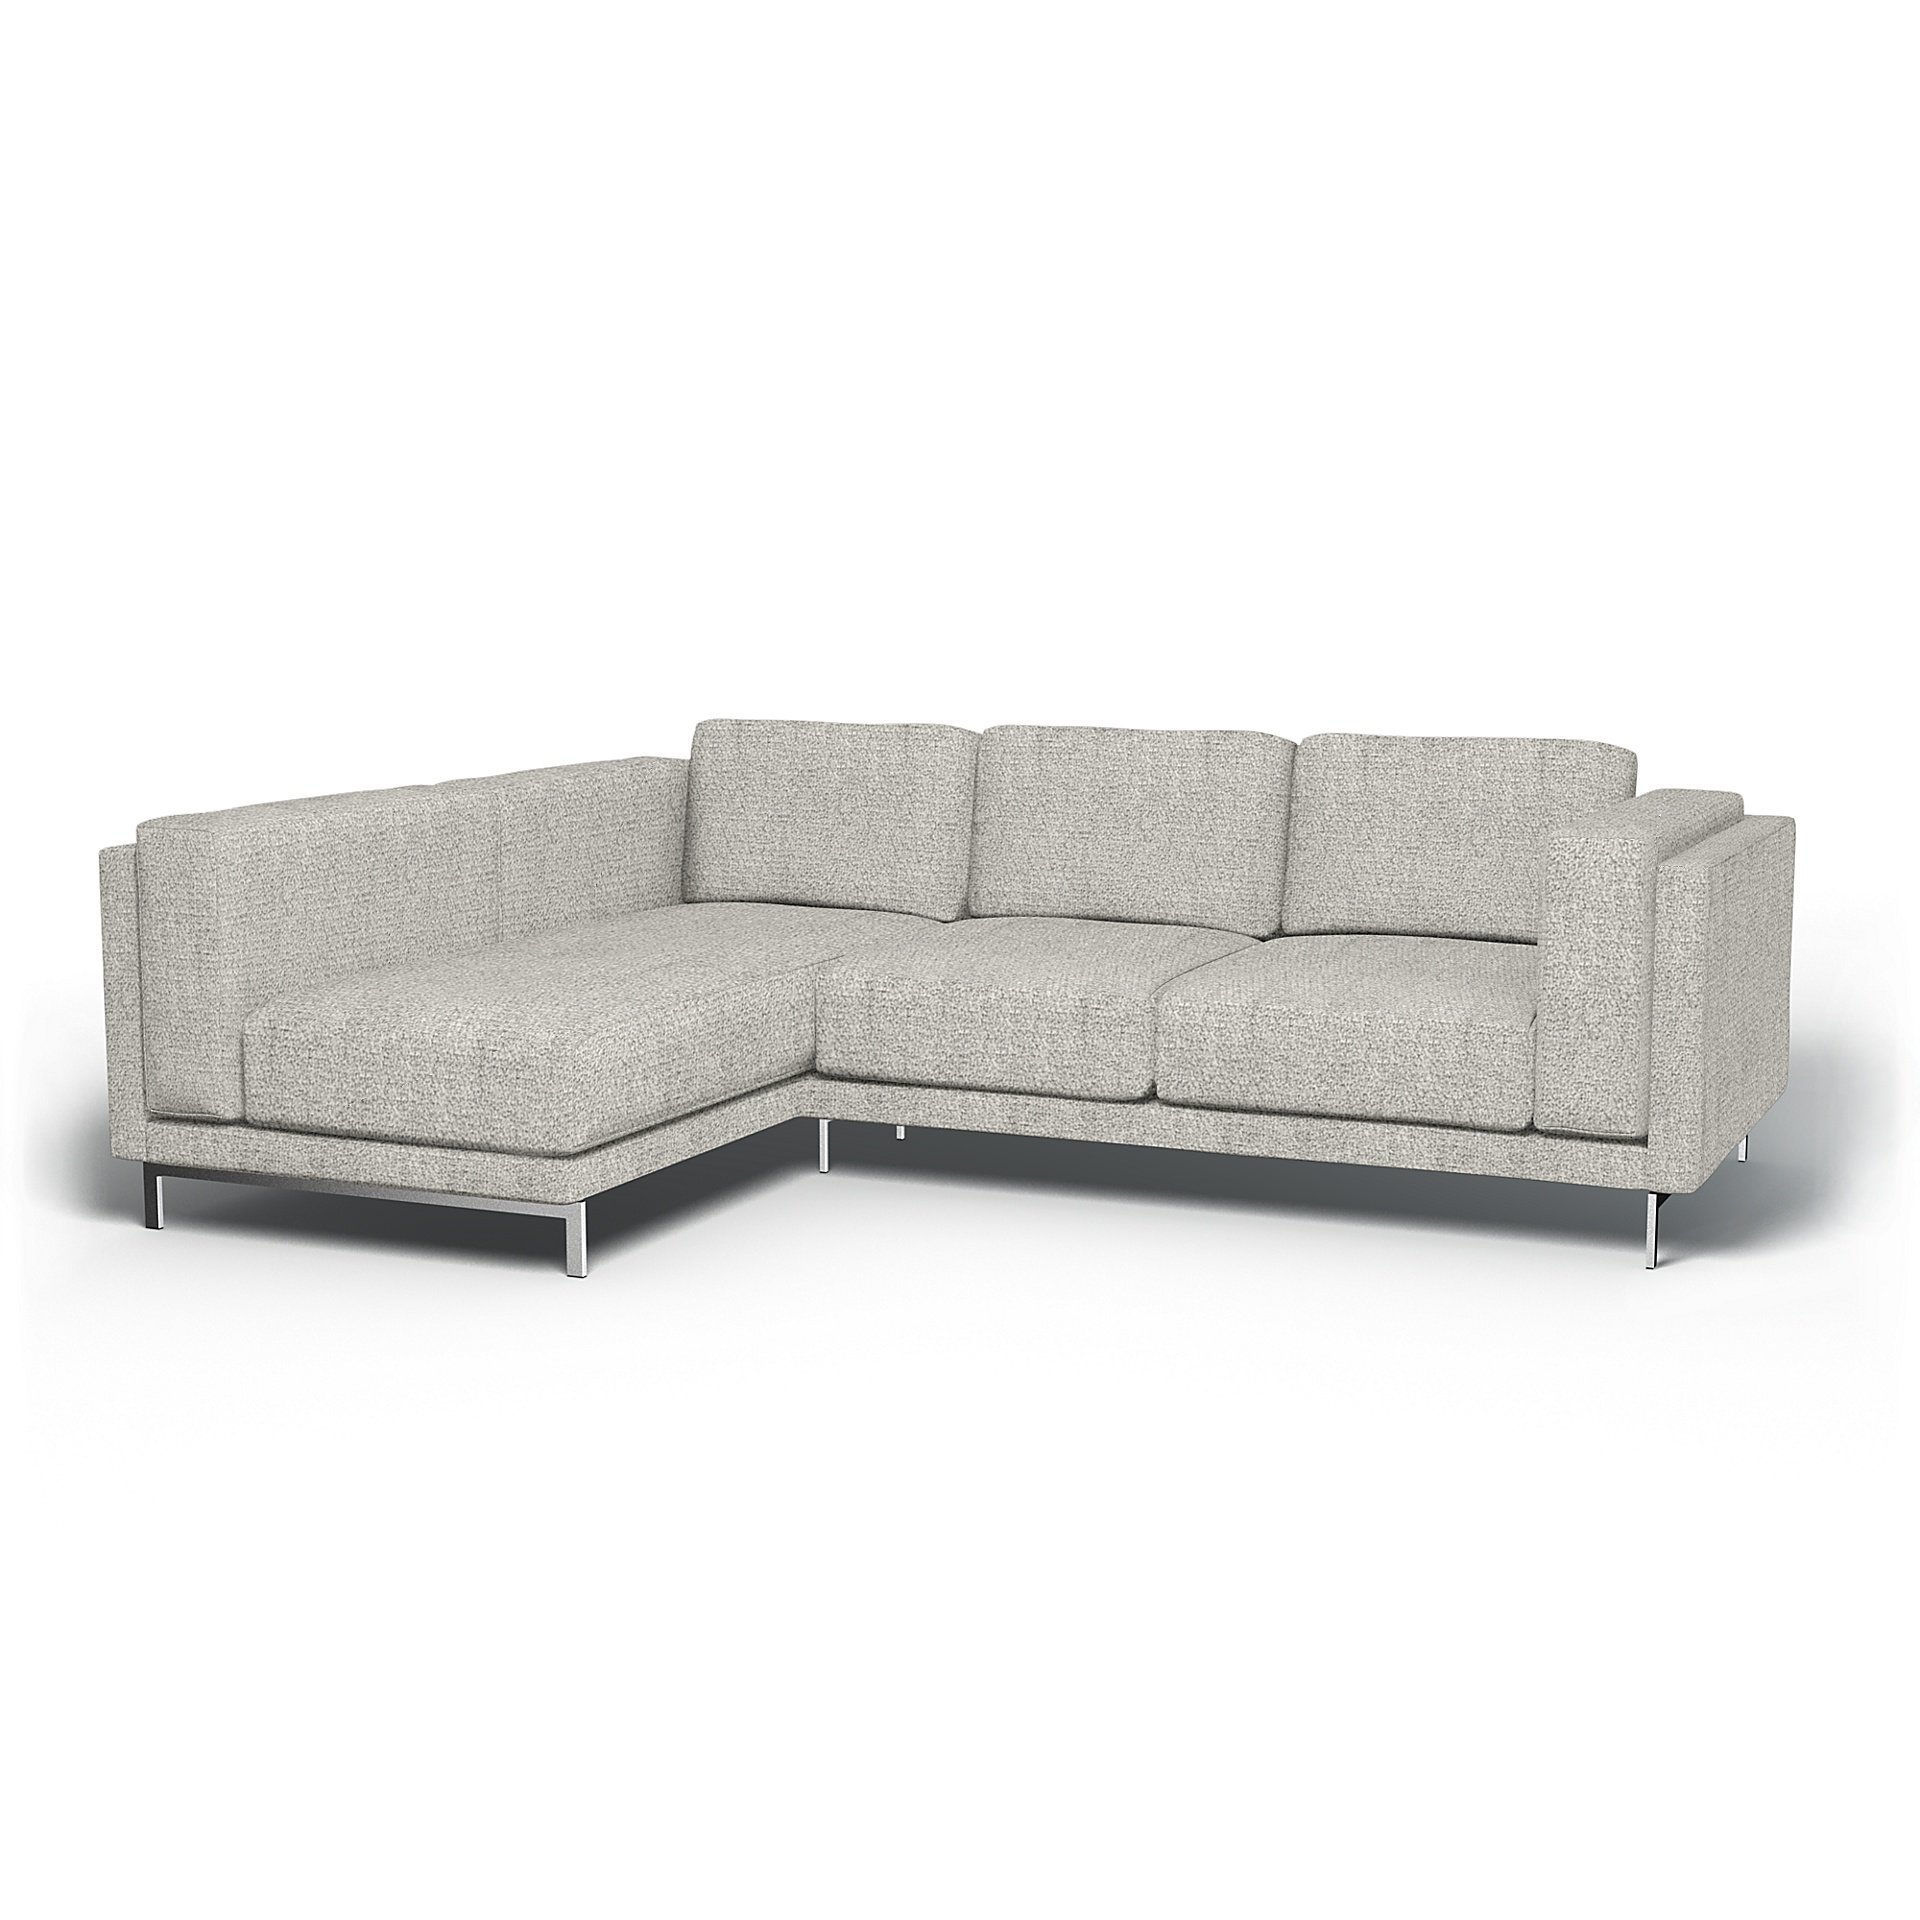 IKEA - Nockeby 3 Seater Sofa with Left Chaise Cover, Driftwood, Boucle & Texture - Bemz